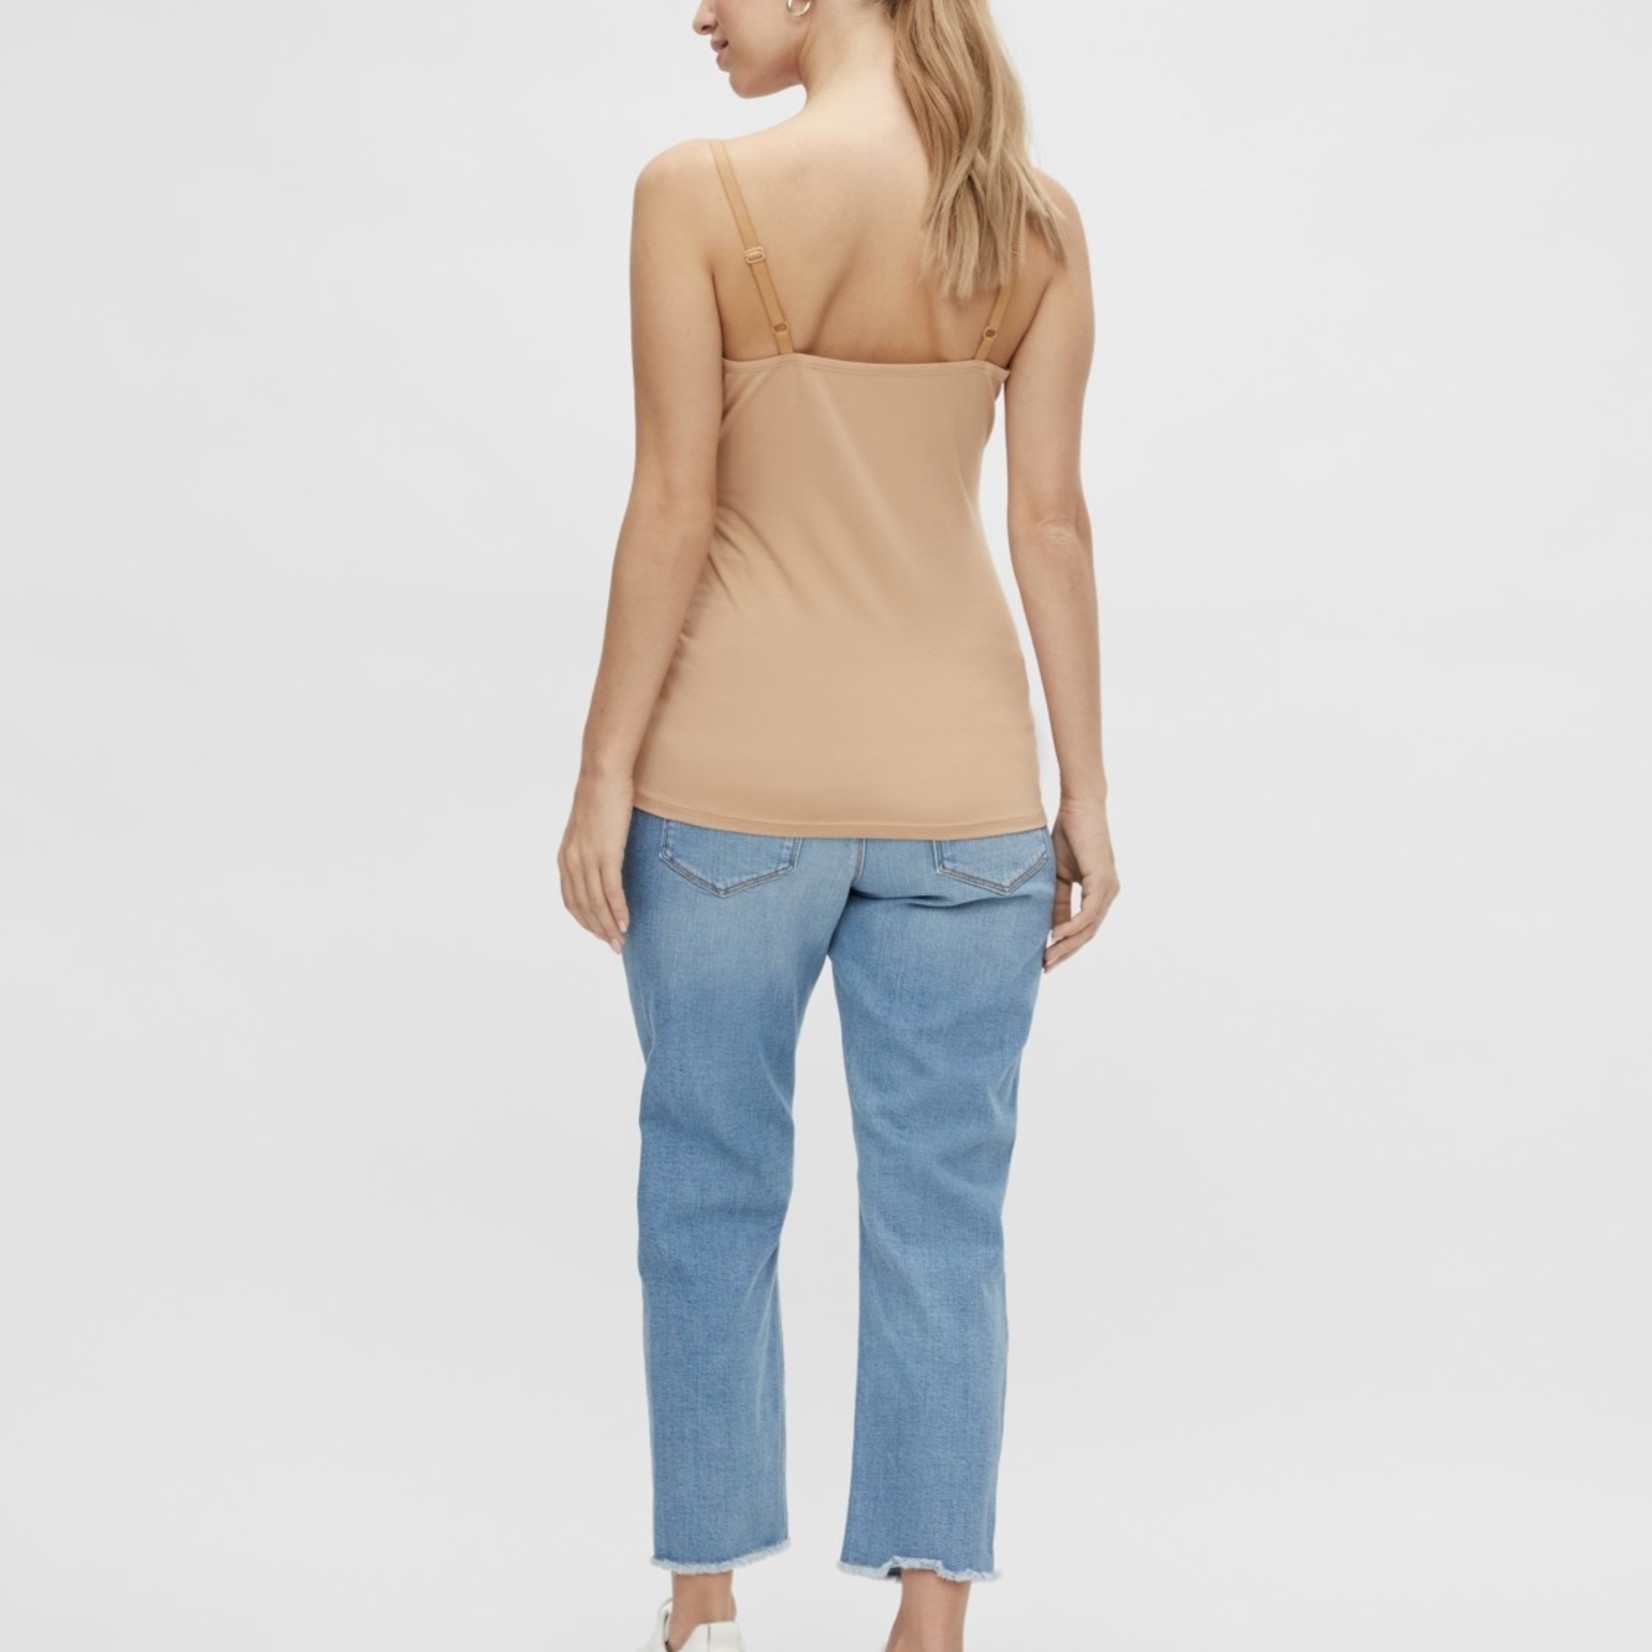 Mamalicious Top Kerrie Strap 2-Pack Copen Blue + Cuban Sand